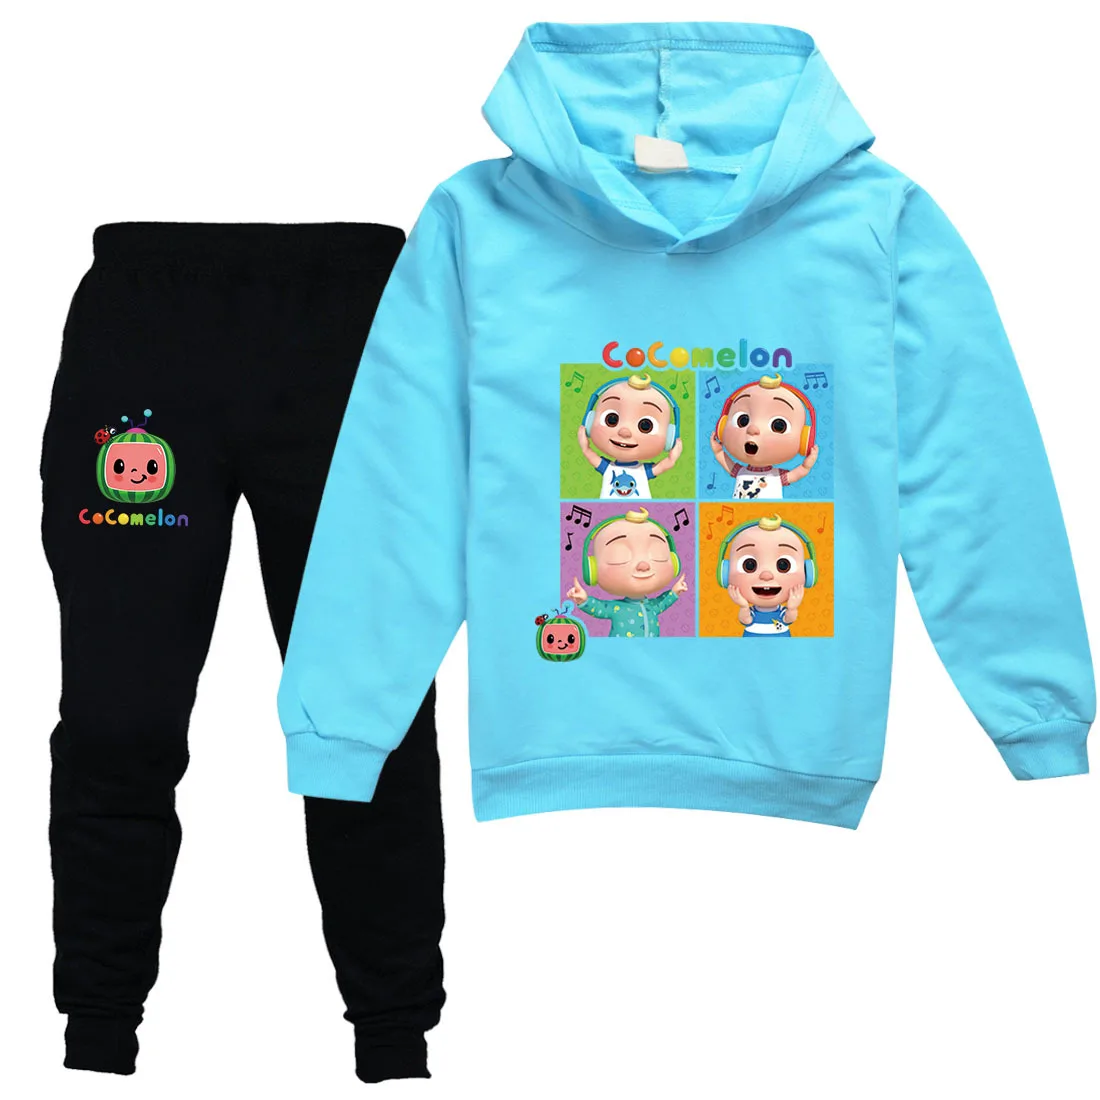 CocoMelon Kids hoodie jogger top and pant set birthday party 